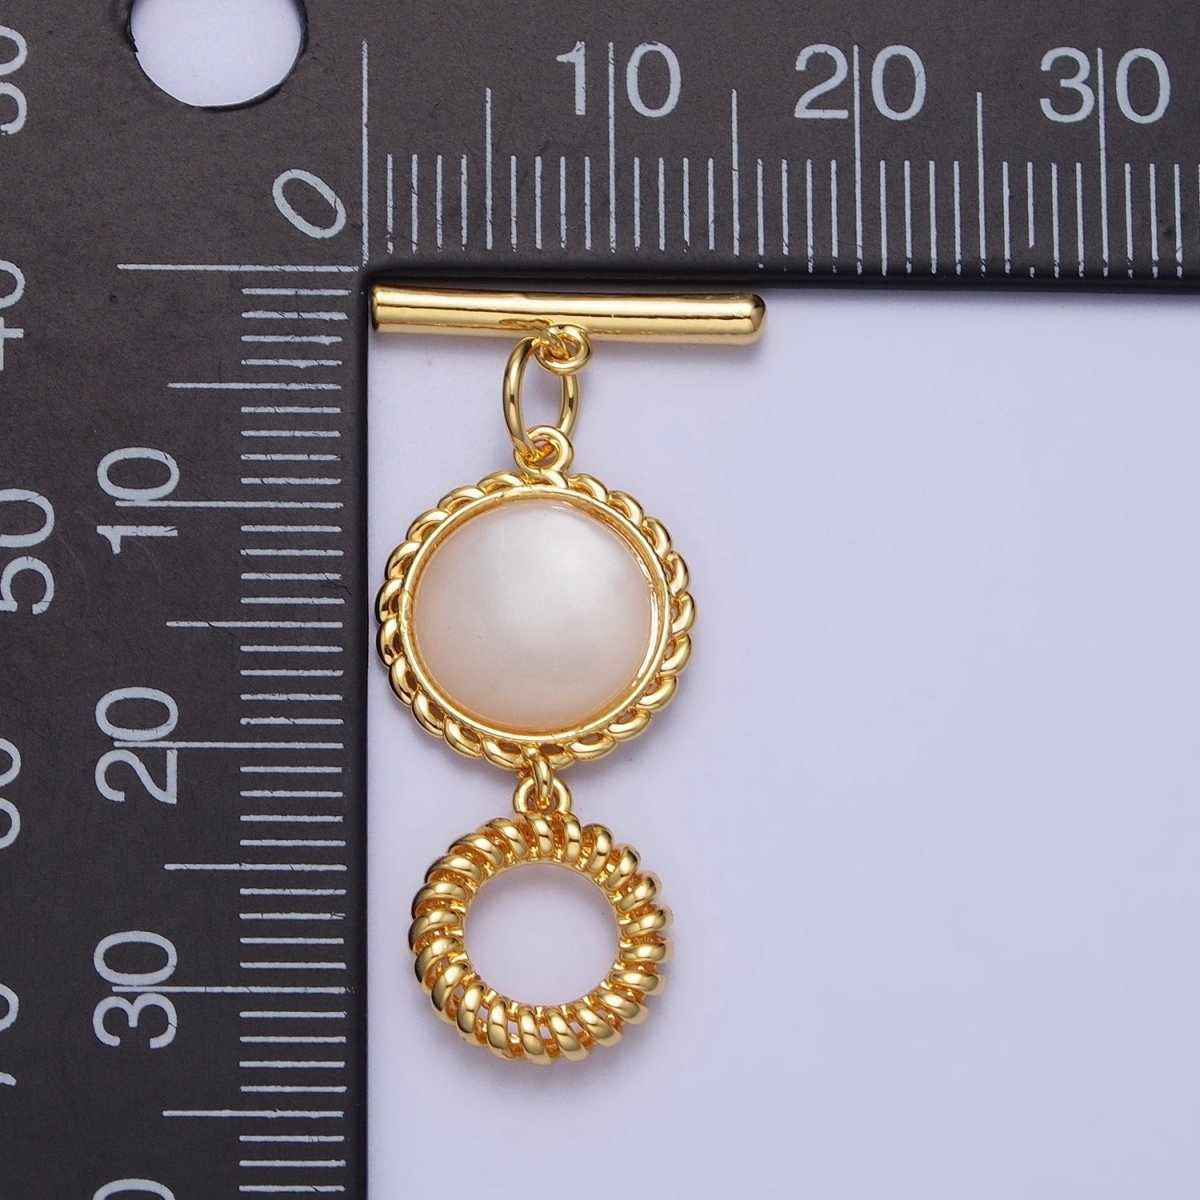 Decorative Pearl OT Clasp for Necklace Bracelet Toggle Clasp Twisted Rope Gold Round Clasp for Jewelry Making Supply Z-063 - DLUXCA